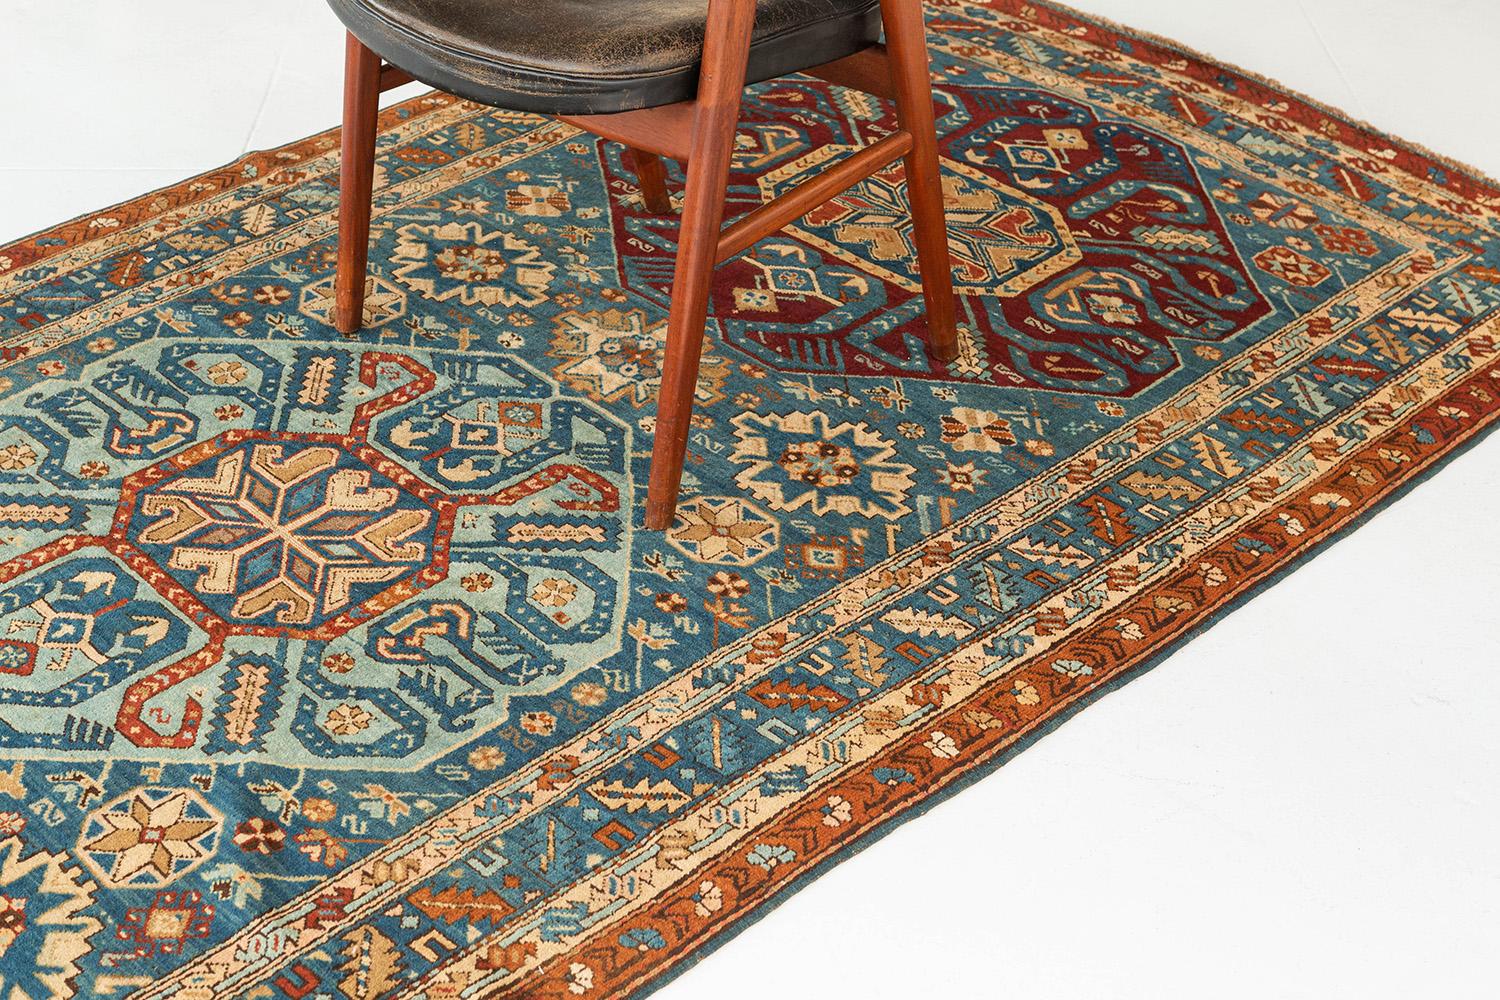 Our authentic and picturesque Persian Kube rug features multicolored weaves that will complement a whole host of designs and color patterns, making this the ultimate versatile carpet. Three expressive medallions are embellished with motifs and